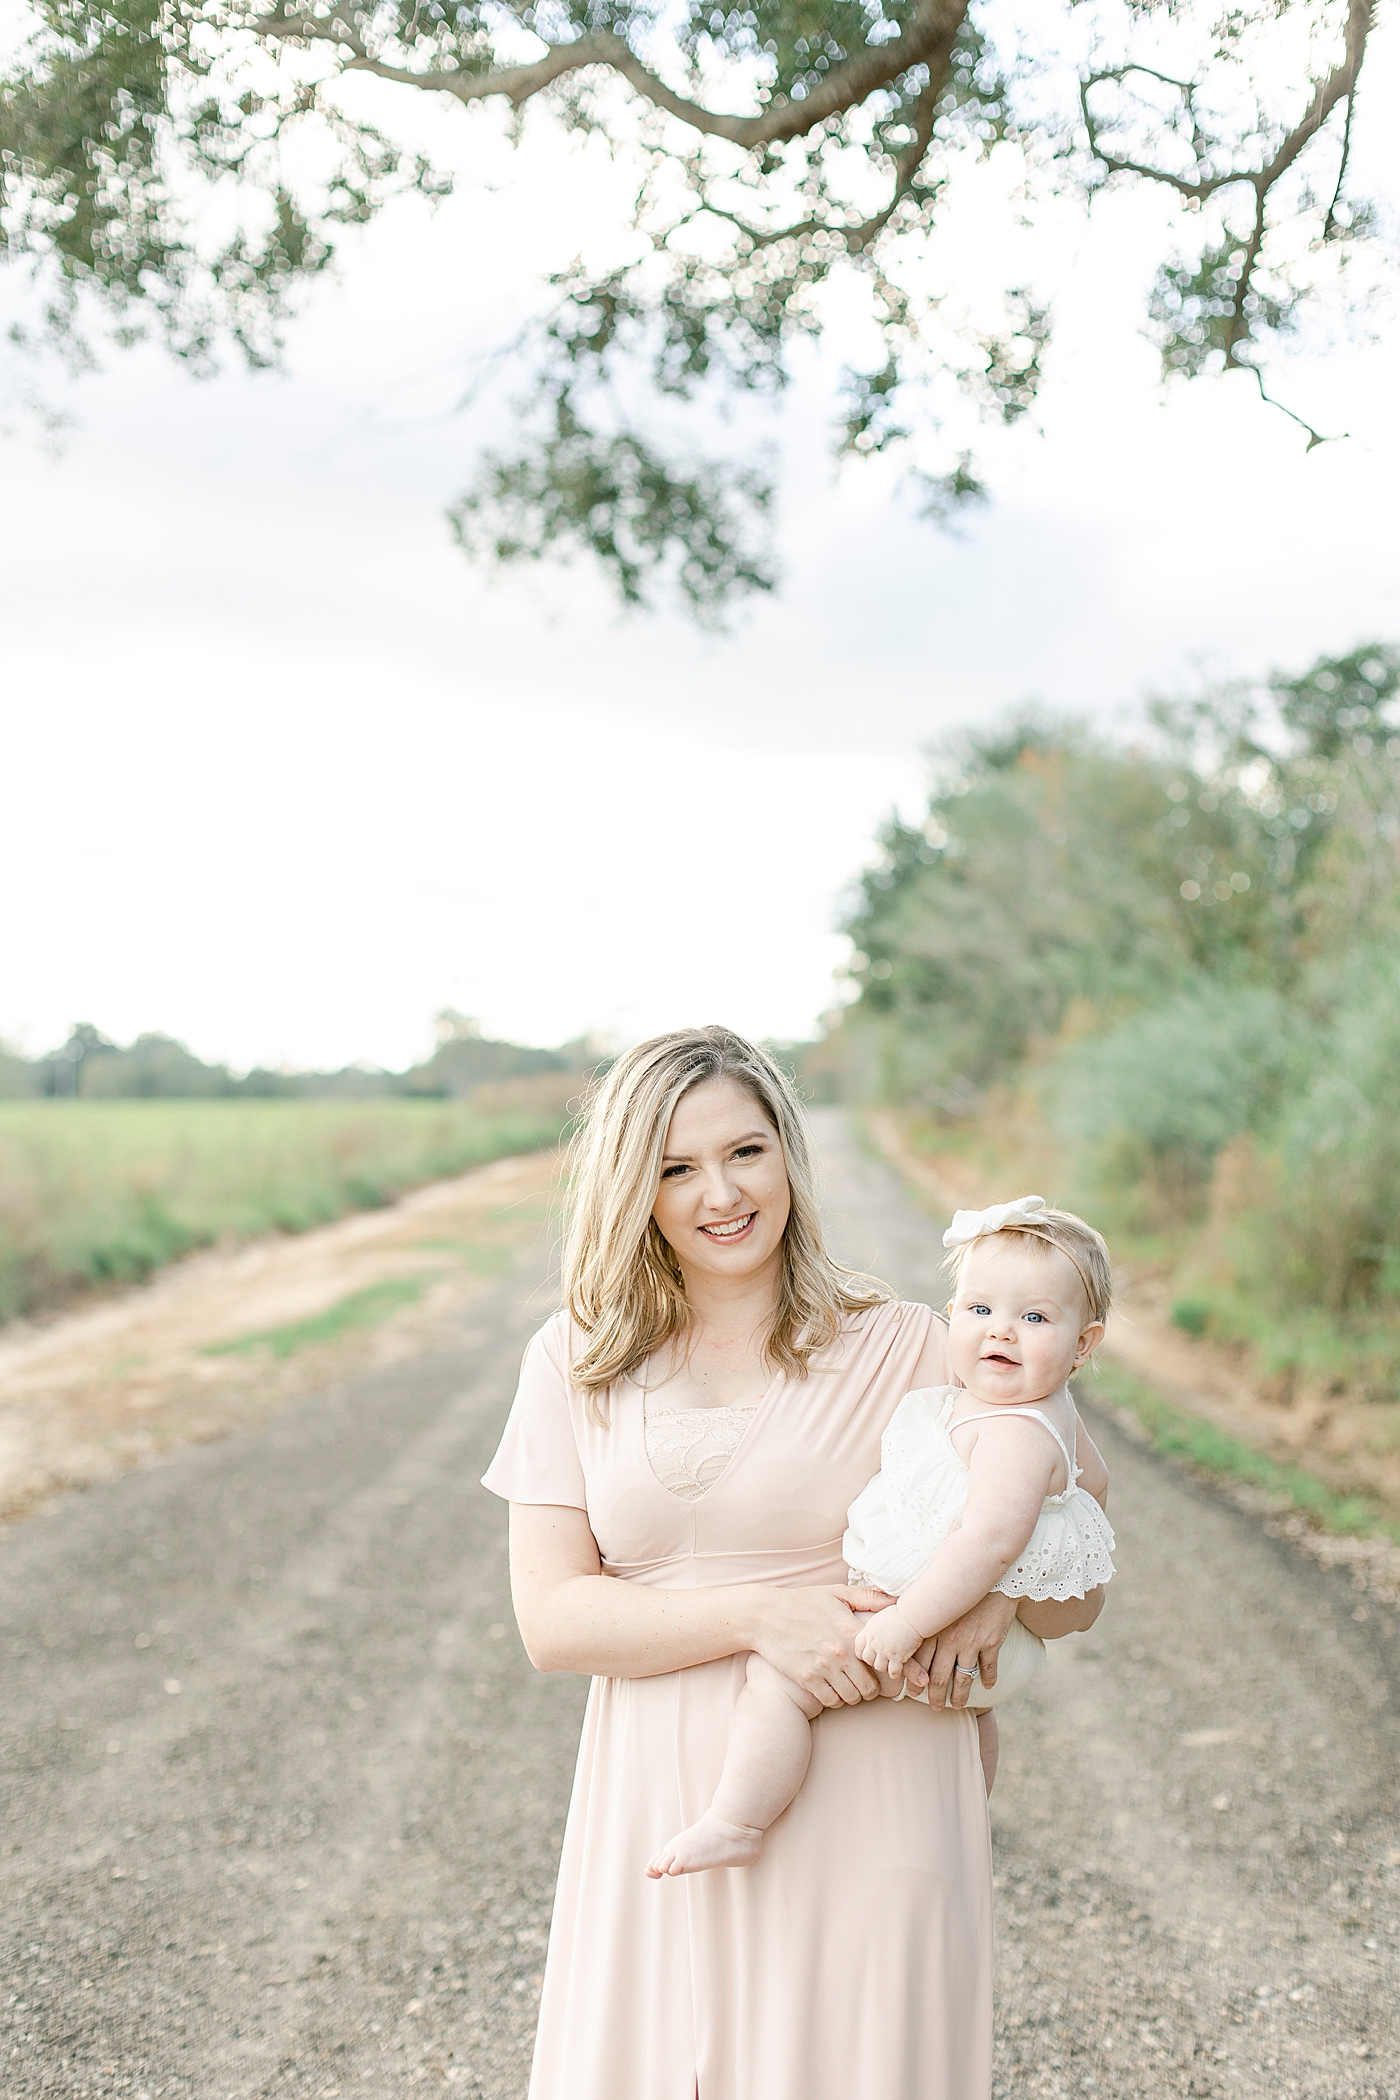 Mom walking with baby girl | Photo by Hattiesburg MS family photographer Little Sunshine Photography 